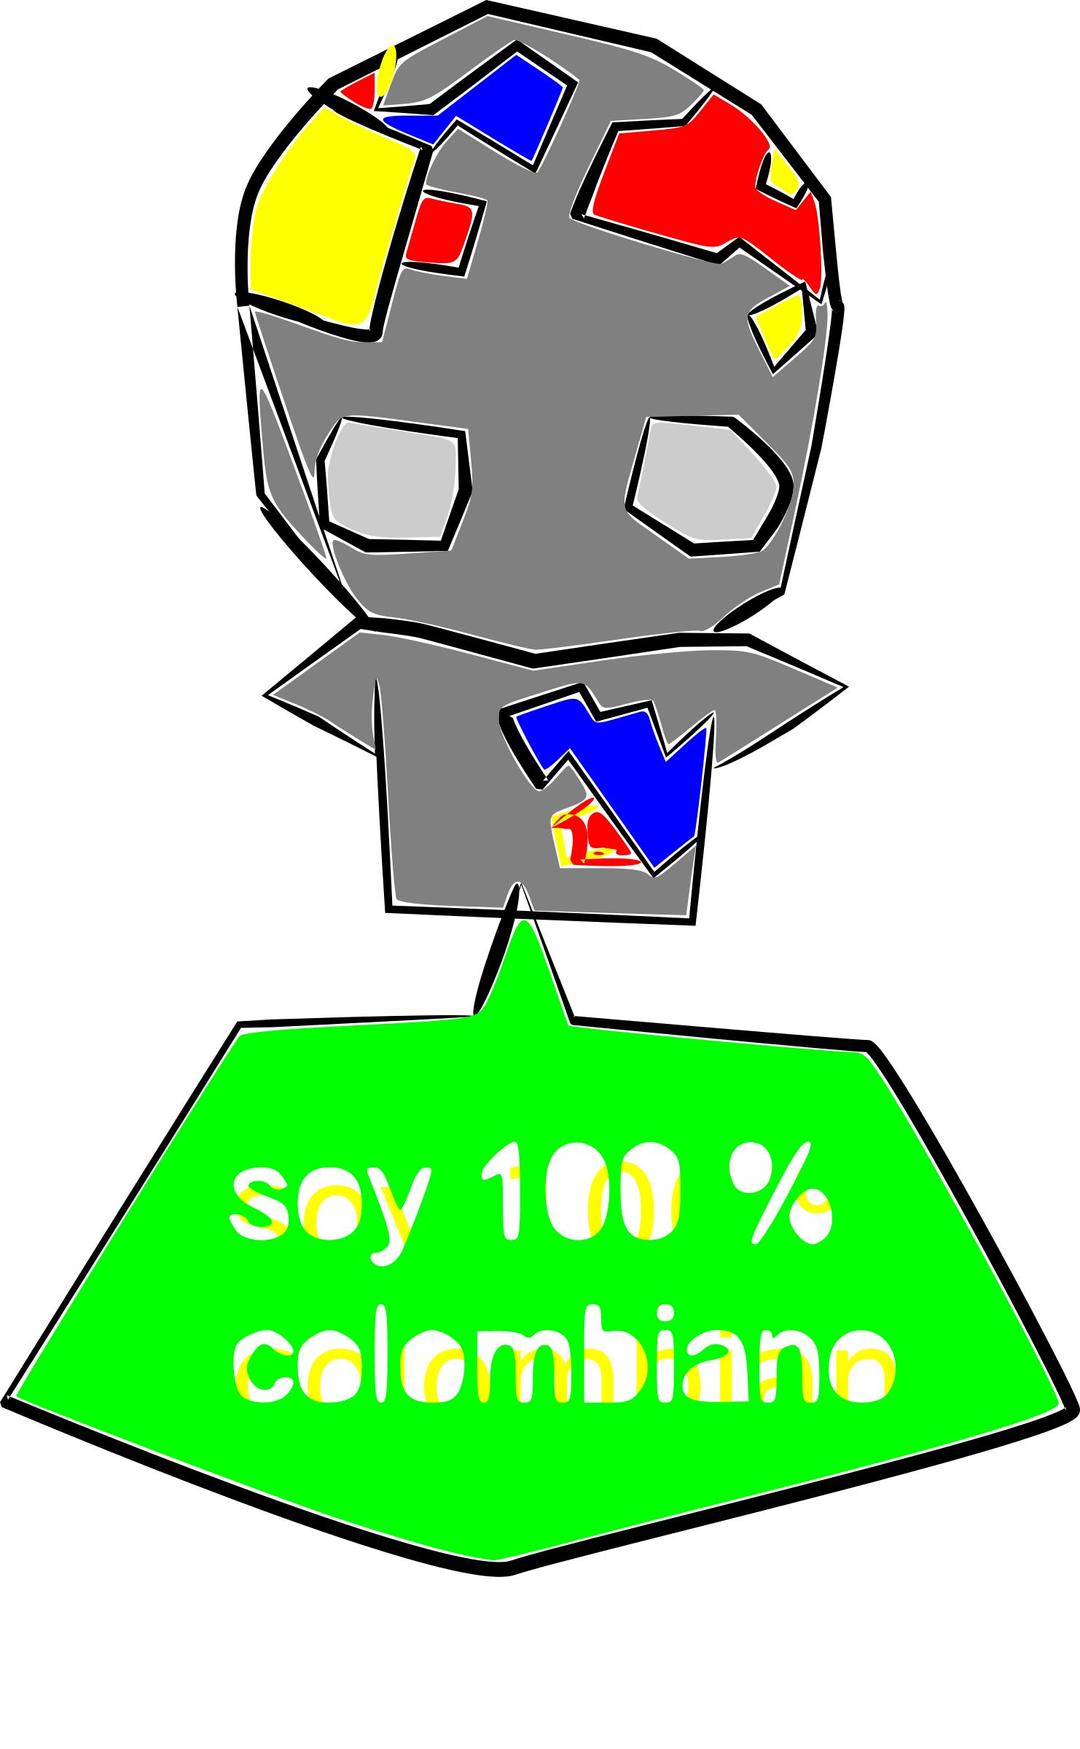 soy 100 % colombiano png transparent